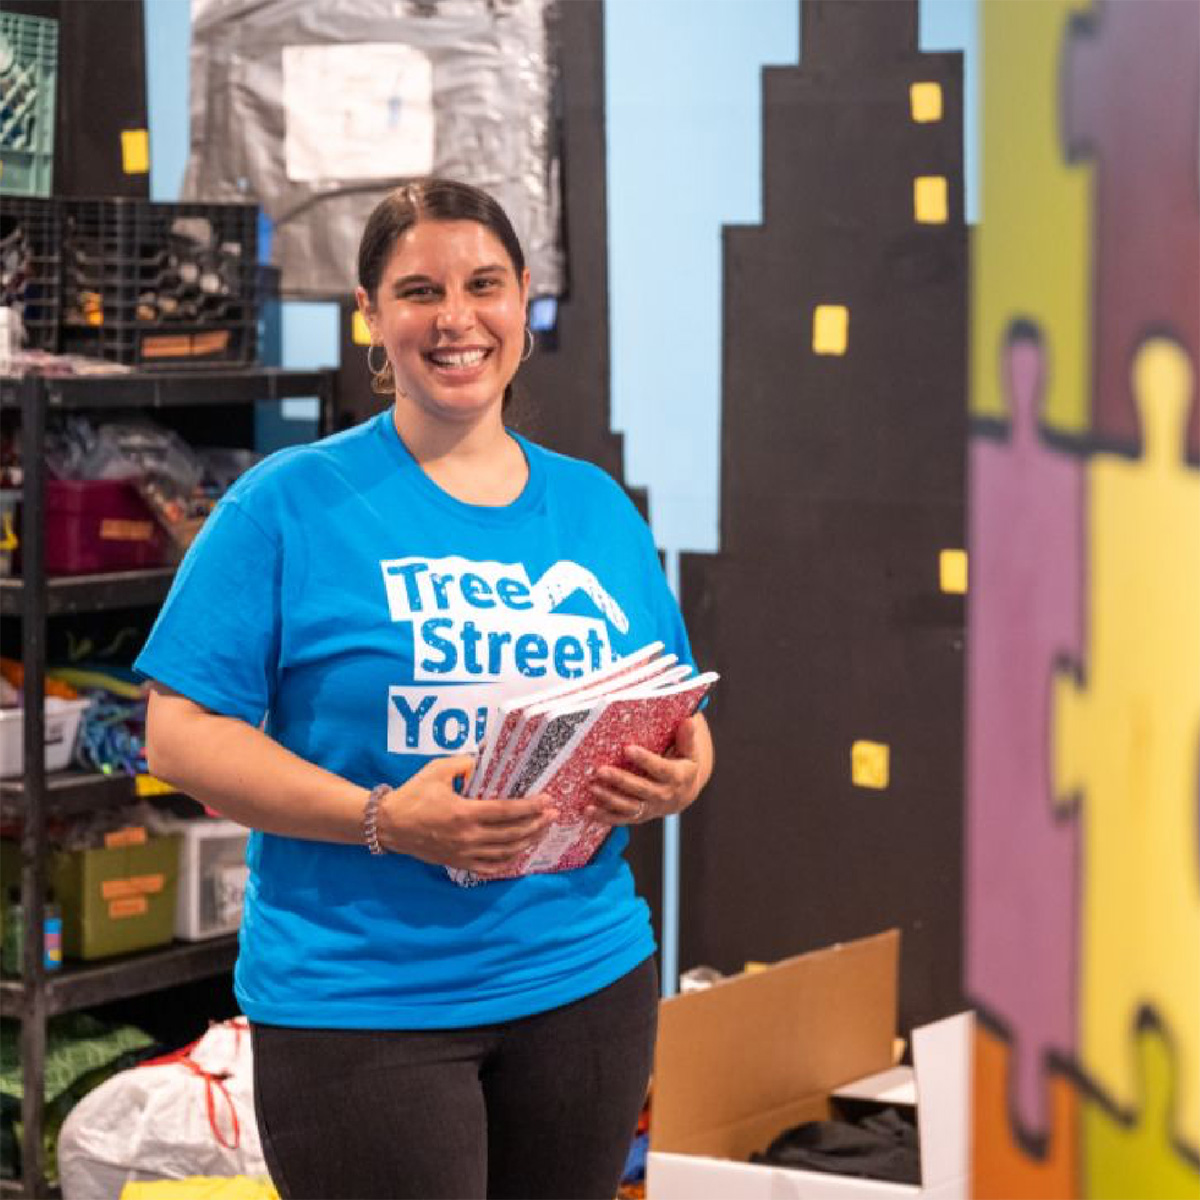 Julia Sleeper-Whiting, Executive Director of Tree Street Youth, stands in a classroom in the building she was able to purchase with the help of financing and guidance from the Genesis Fund.